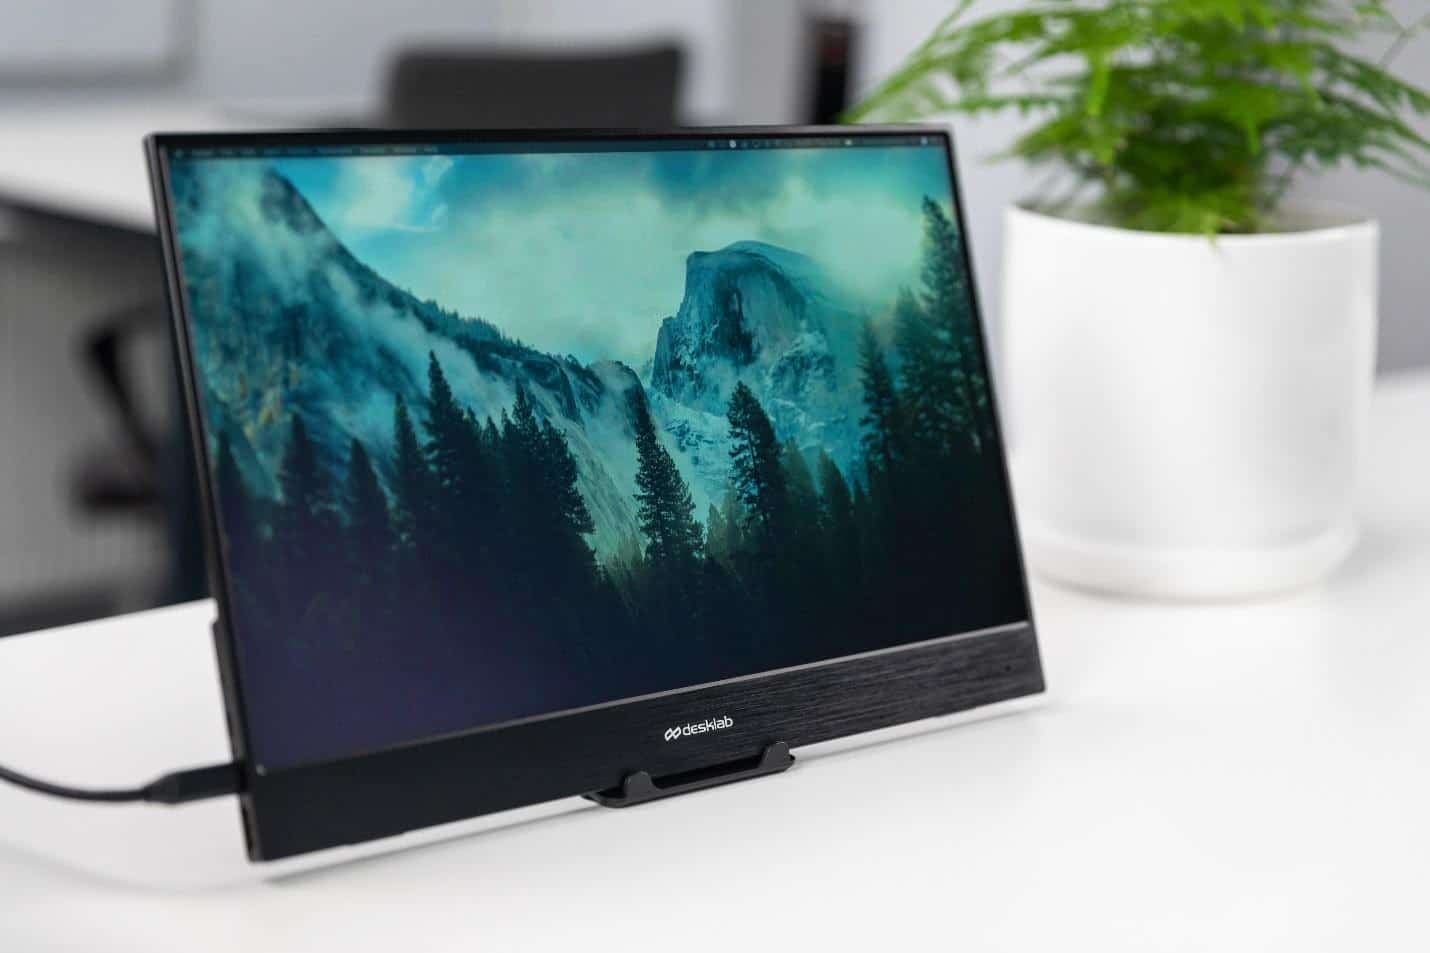 27 Of The Best Portable Monitors To Buy in 2021 - Reviewed